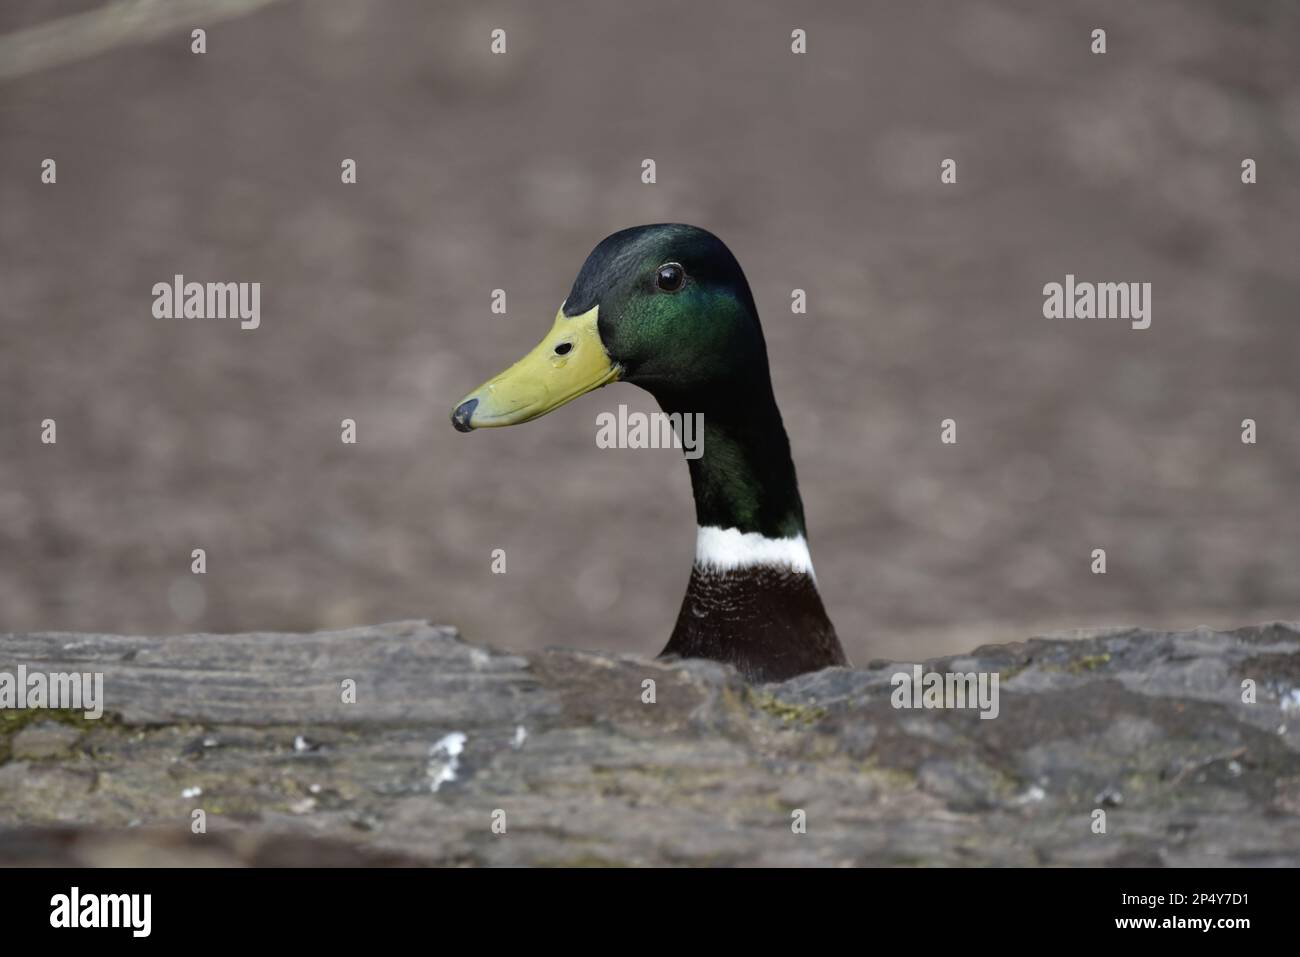 Head and Neck Portrait of a Drake Mallard Duck (Anas platyrhynchos) Peering Over Top of a Decaying Tree Log in Foreground, taken in the UK in February Stock Photo